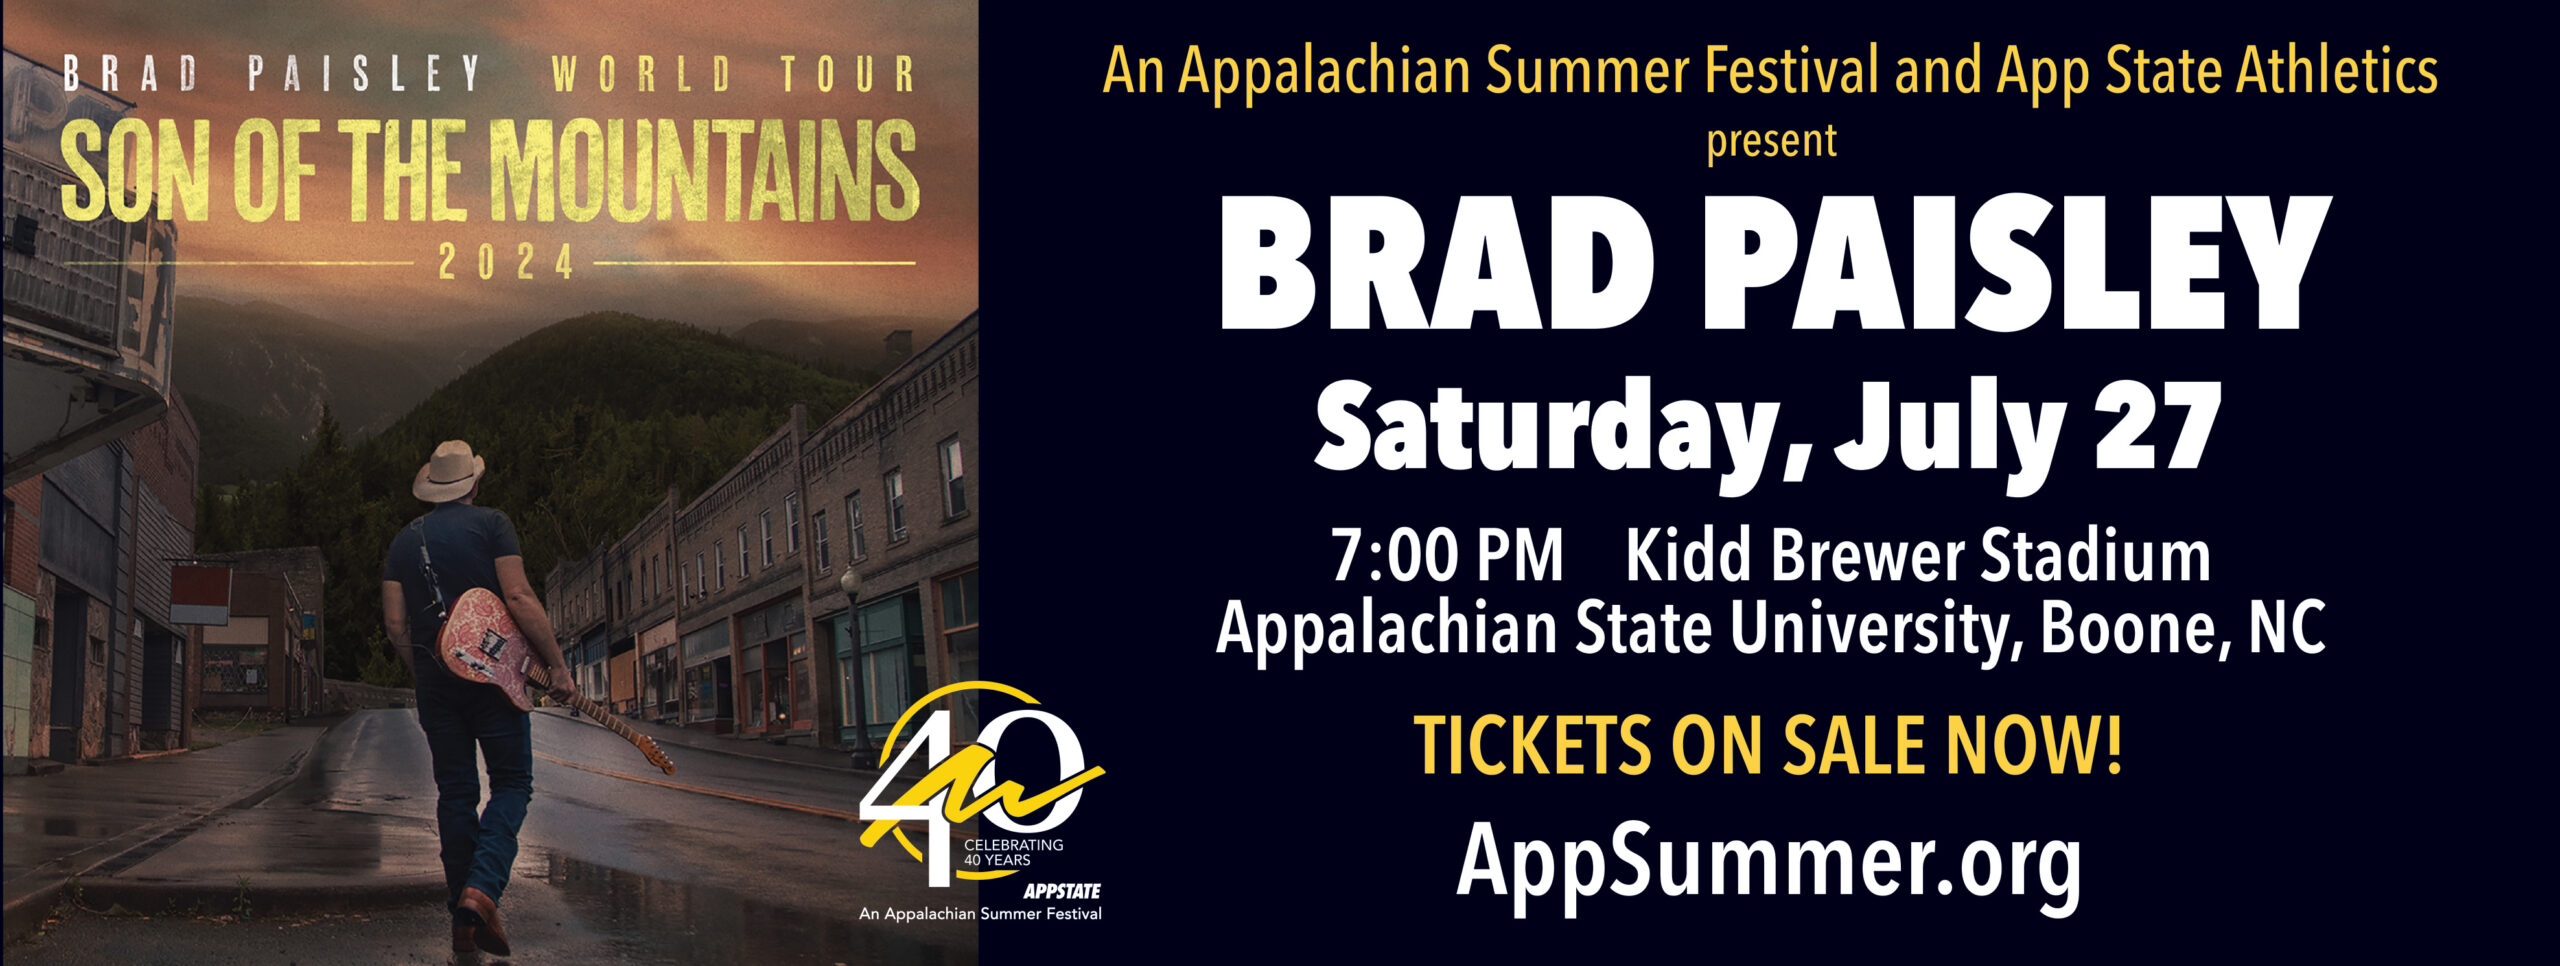 Brad Paisley Son of the Mountains World Tour Saturday, July 27 at 7pm. Tickets at AppSummer.org